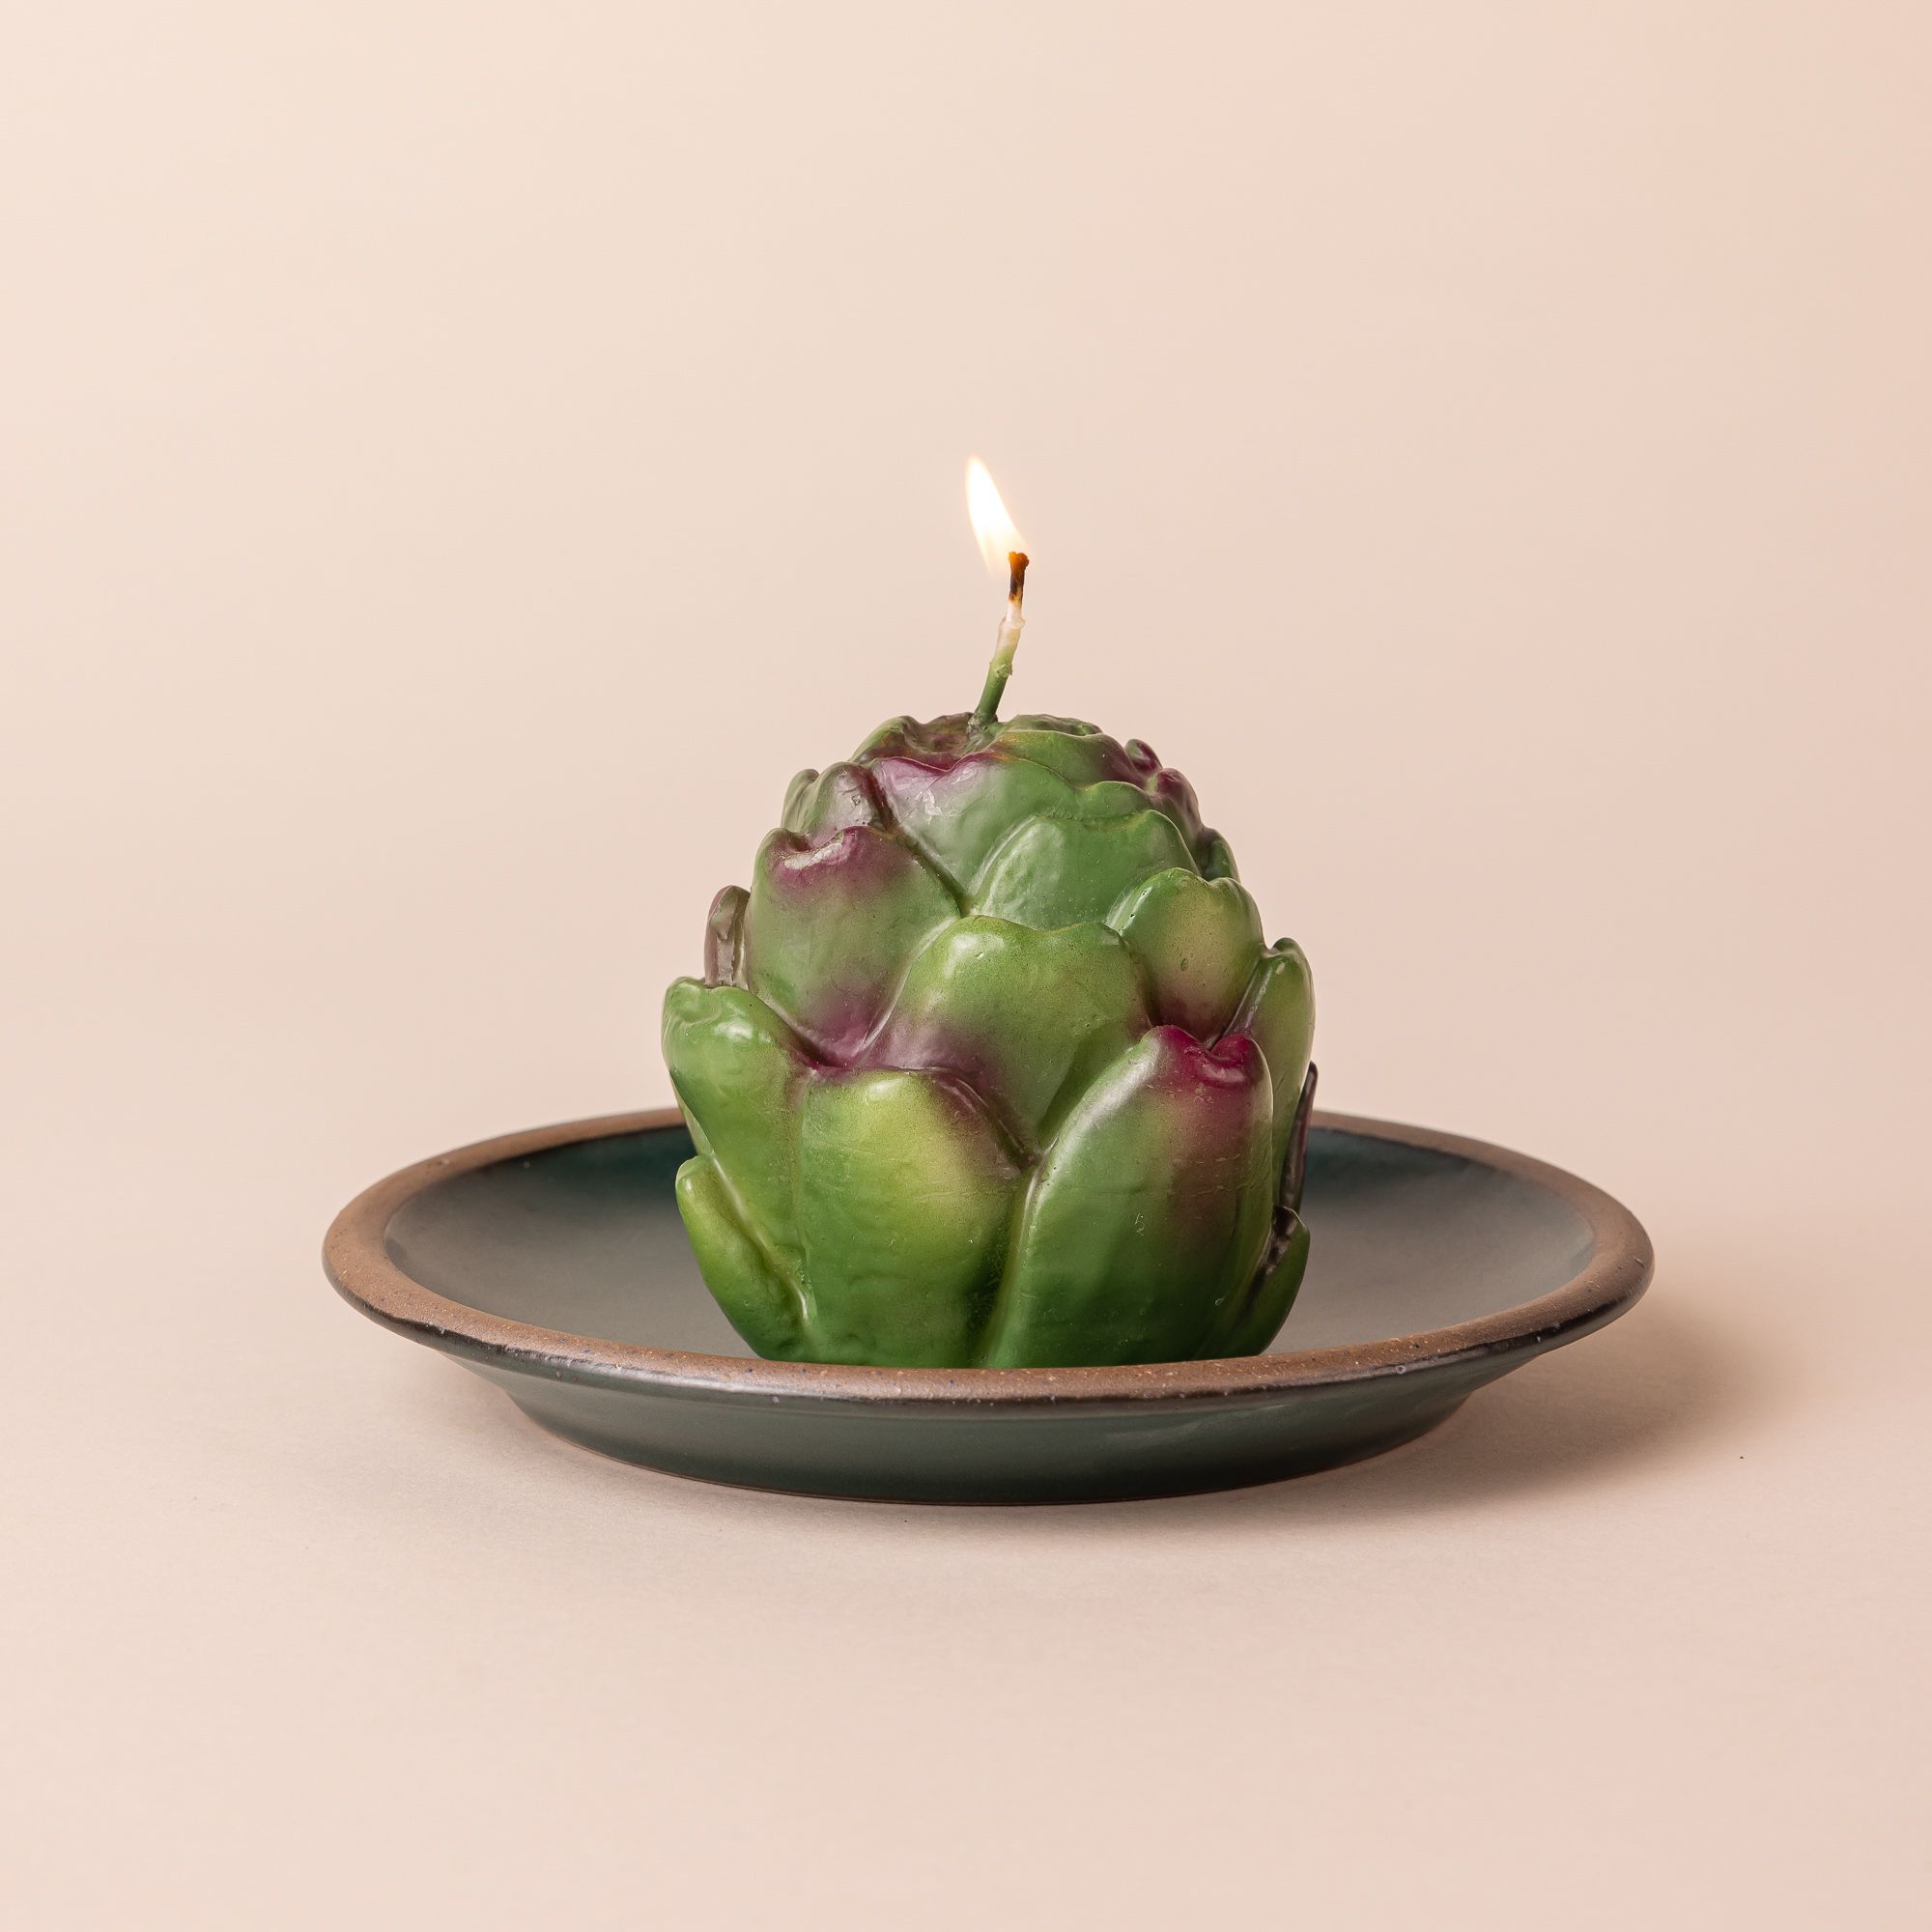 An artichoke candle with a burning flame sits on a small plate